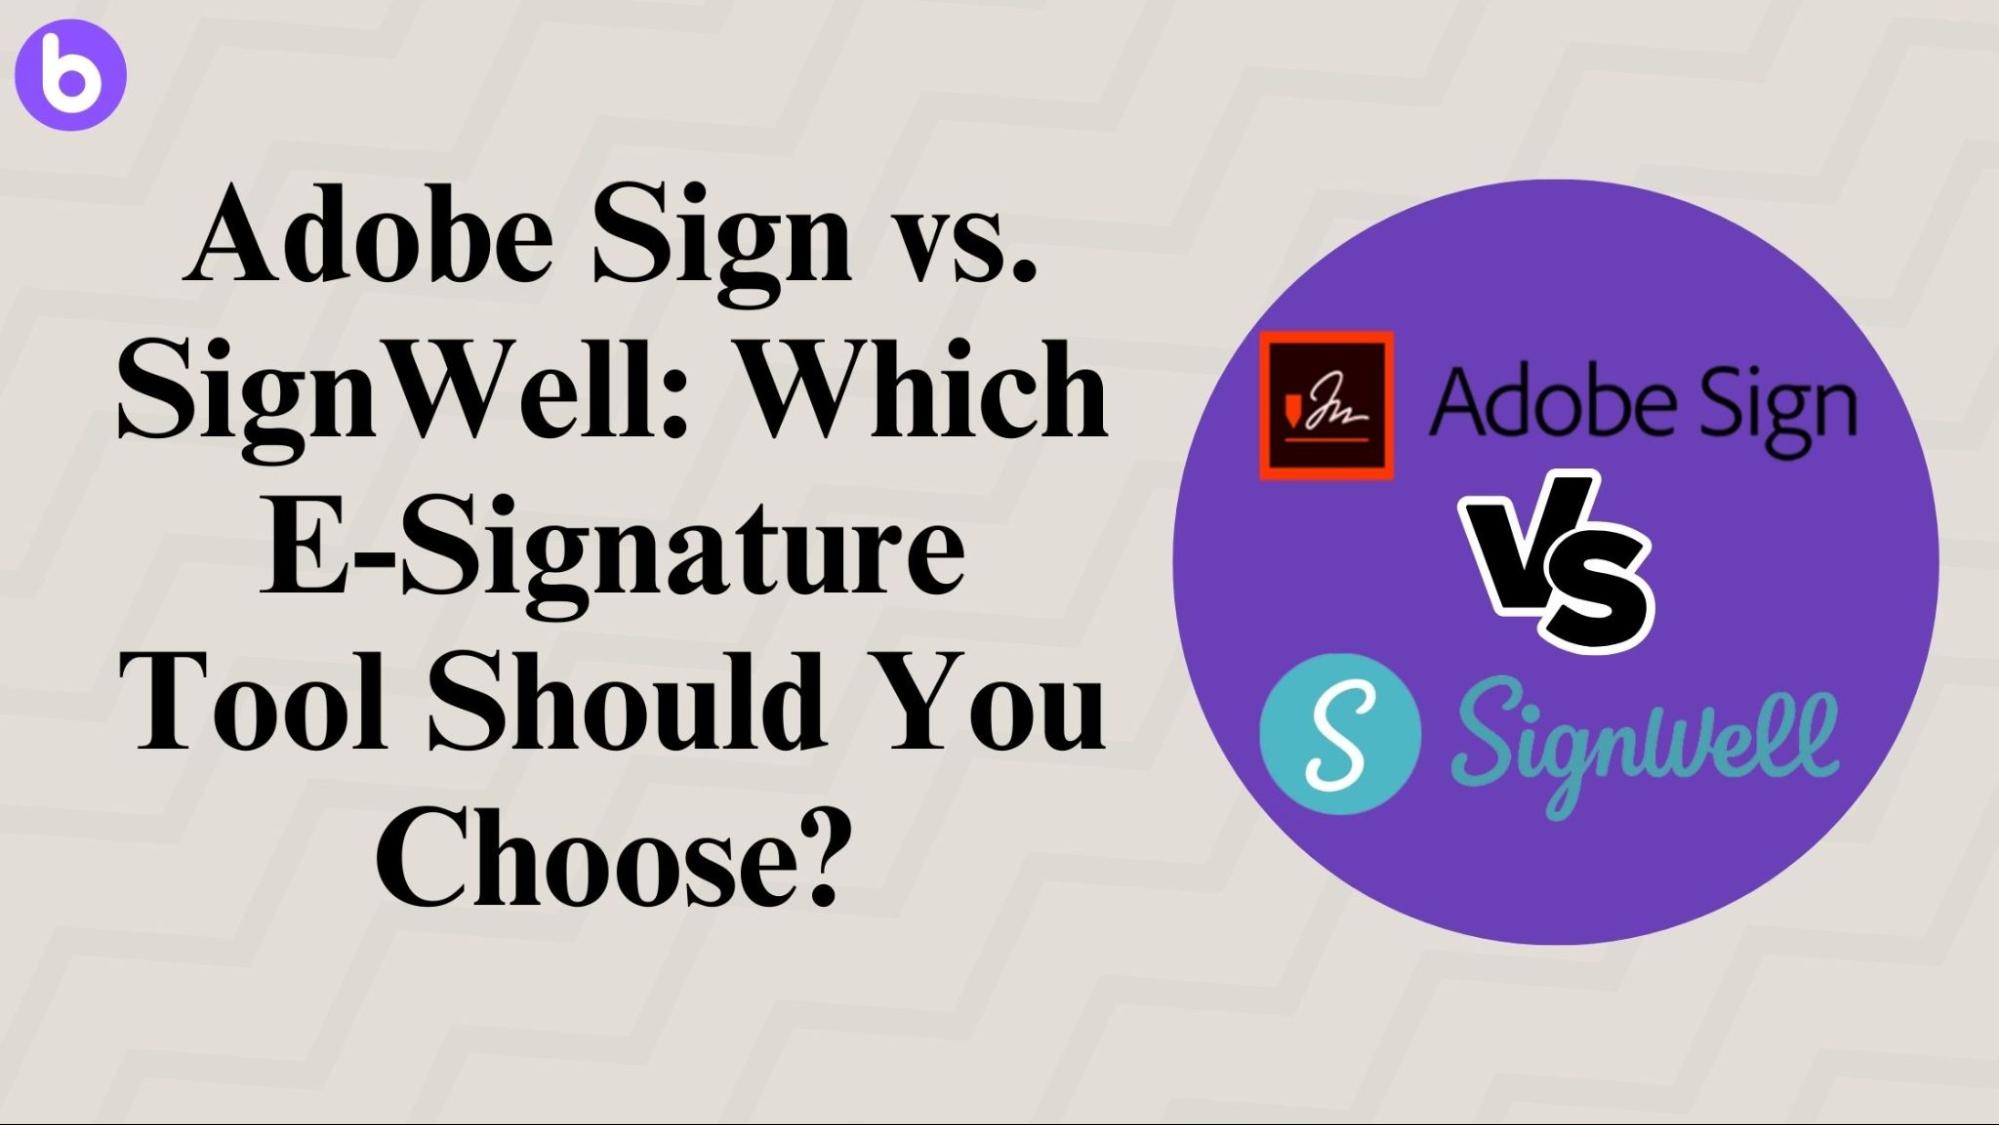 Adobe Sign vs. SignWell: Which E-Signature Tool Should You Choose?